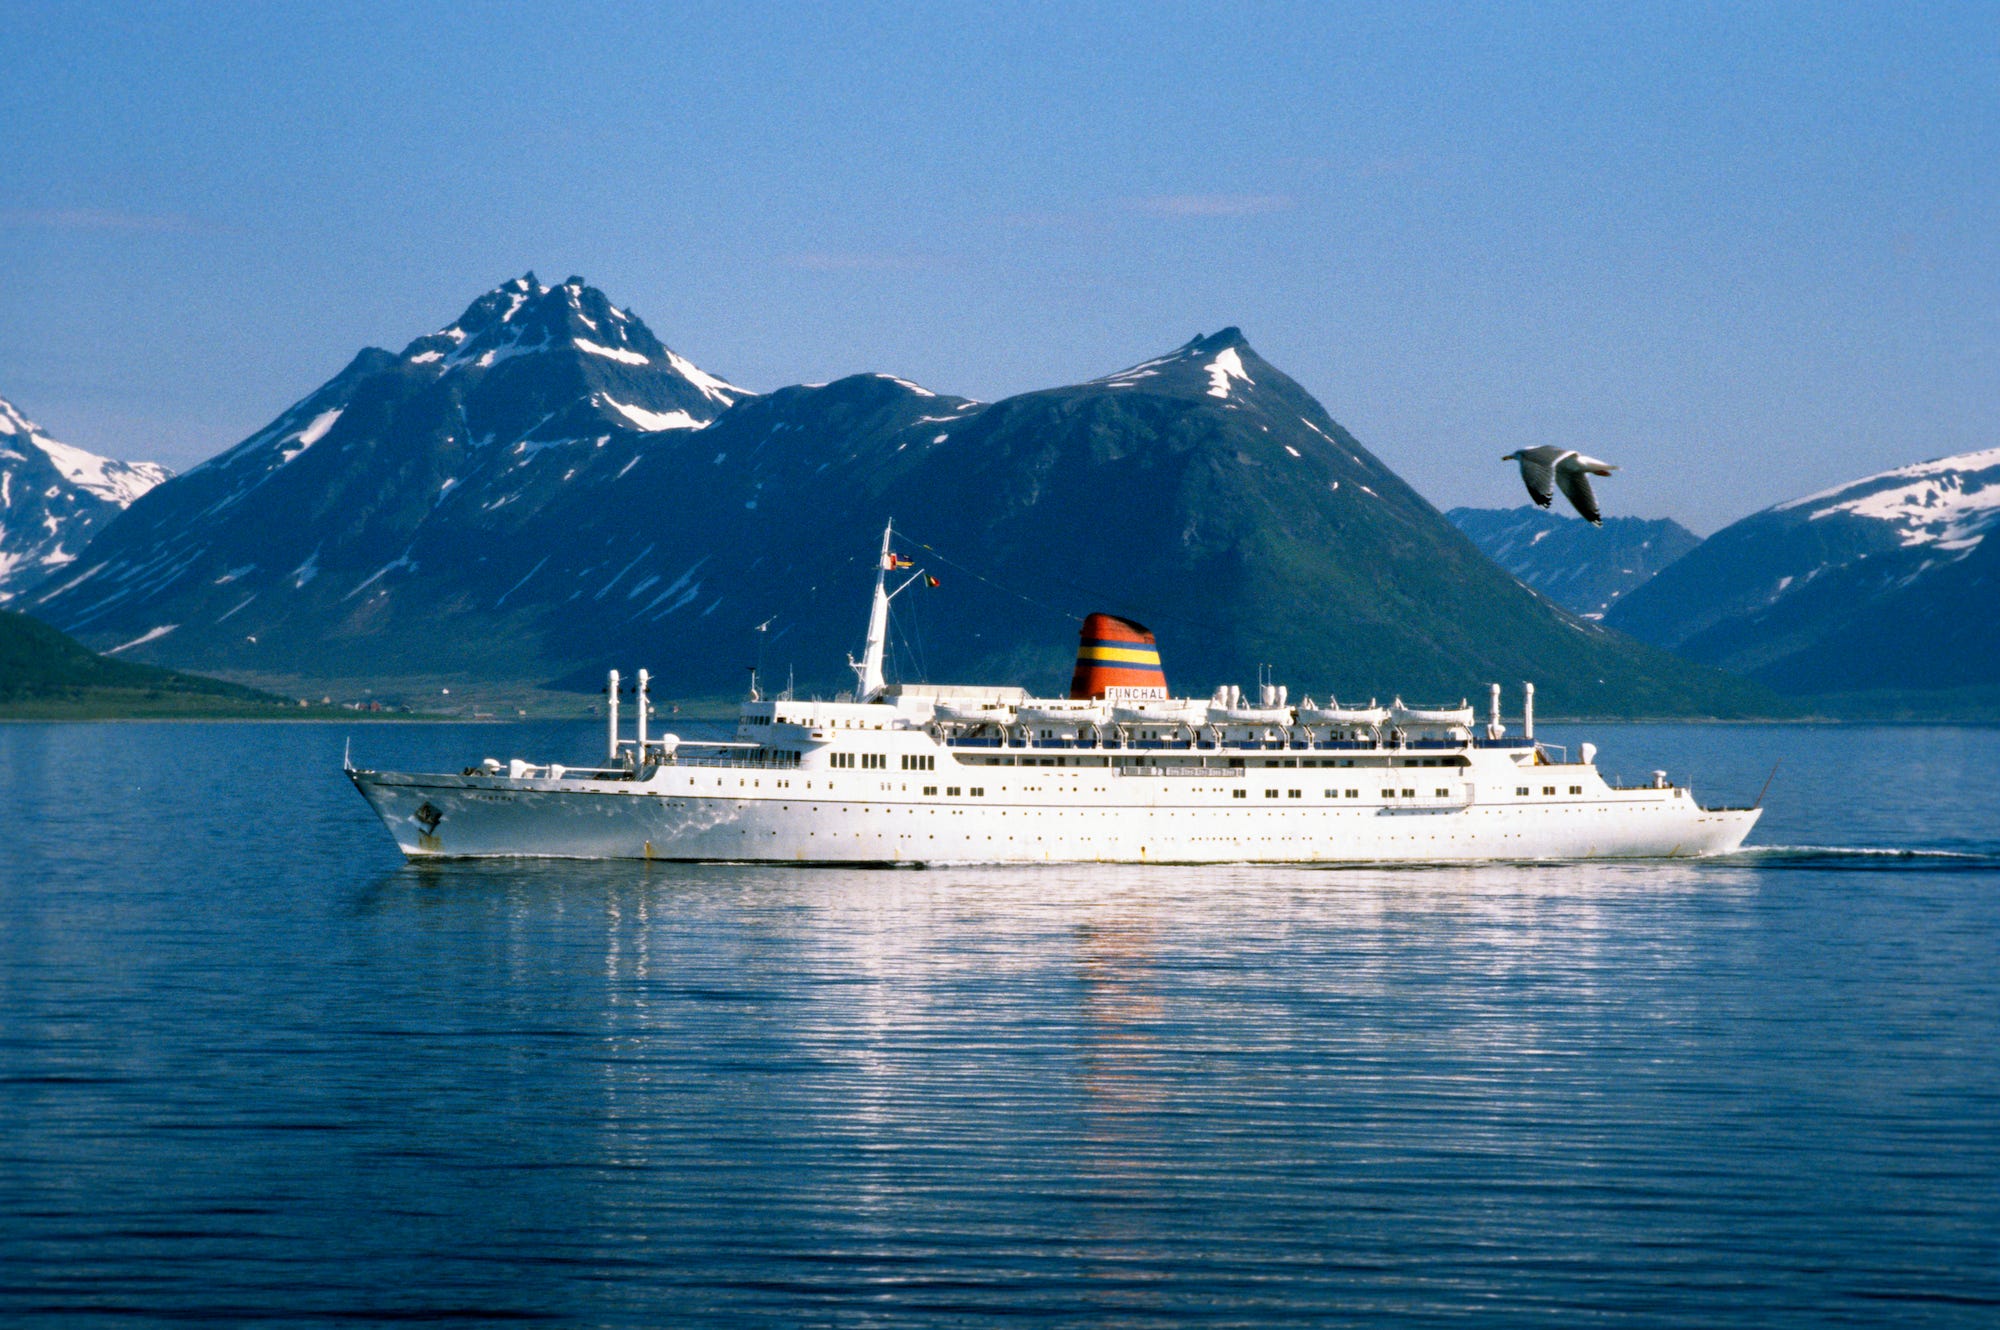 <p>Luescher said cruise-lovers should consider taking their next voyage around <a href="https://www.businessinsider.com/my-great-grandfathers-gravestone-in-norway-was-removed-2023-6">Norway</a>.</p><p>The Scandinavian country is known for its UNESCO-protected fjords, frozen glaciers, and beautiful forests — and you can see it all from the comfort of a luxury vessel.</p><p>Norway has become a popular destination for cruise itineraries in recent years, with some voyages dedicated entirely to the country. British cruise line P&O and luxury cruise operators Cunard and Silversea offer voyages to Norway in 2024.</p>